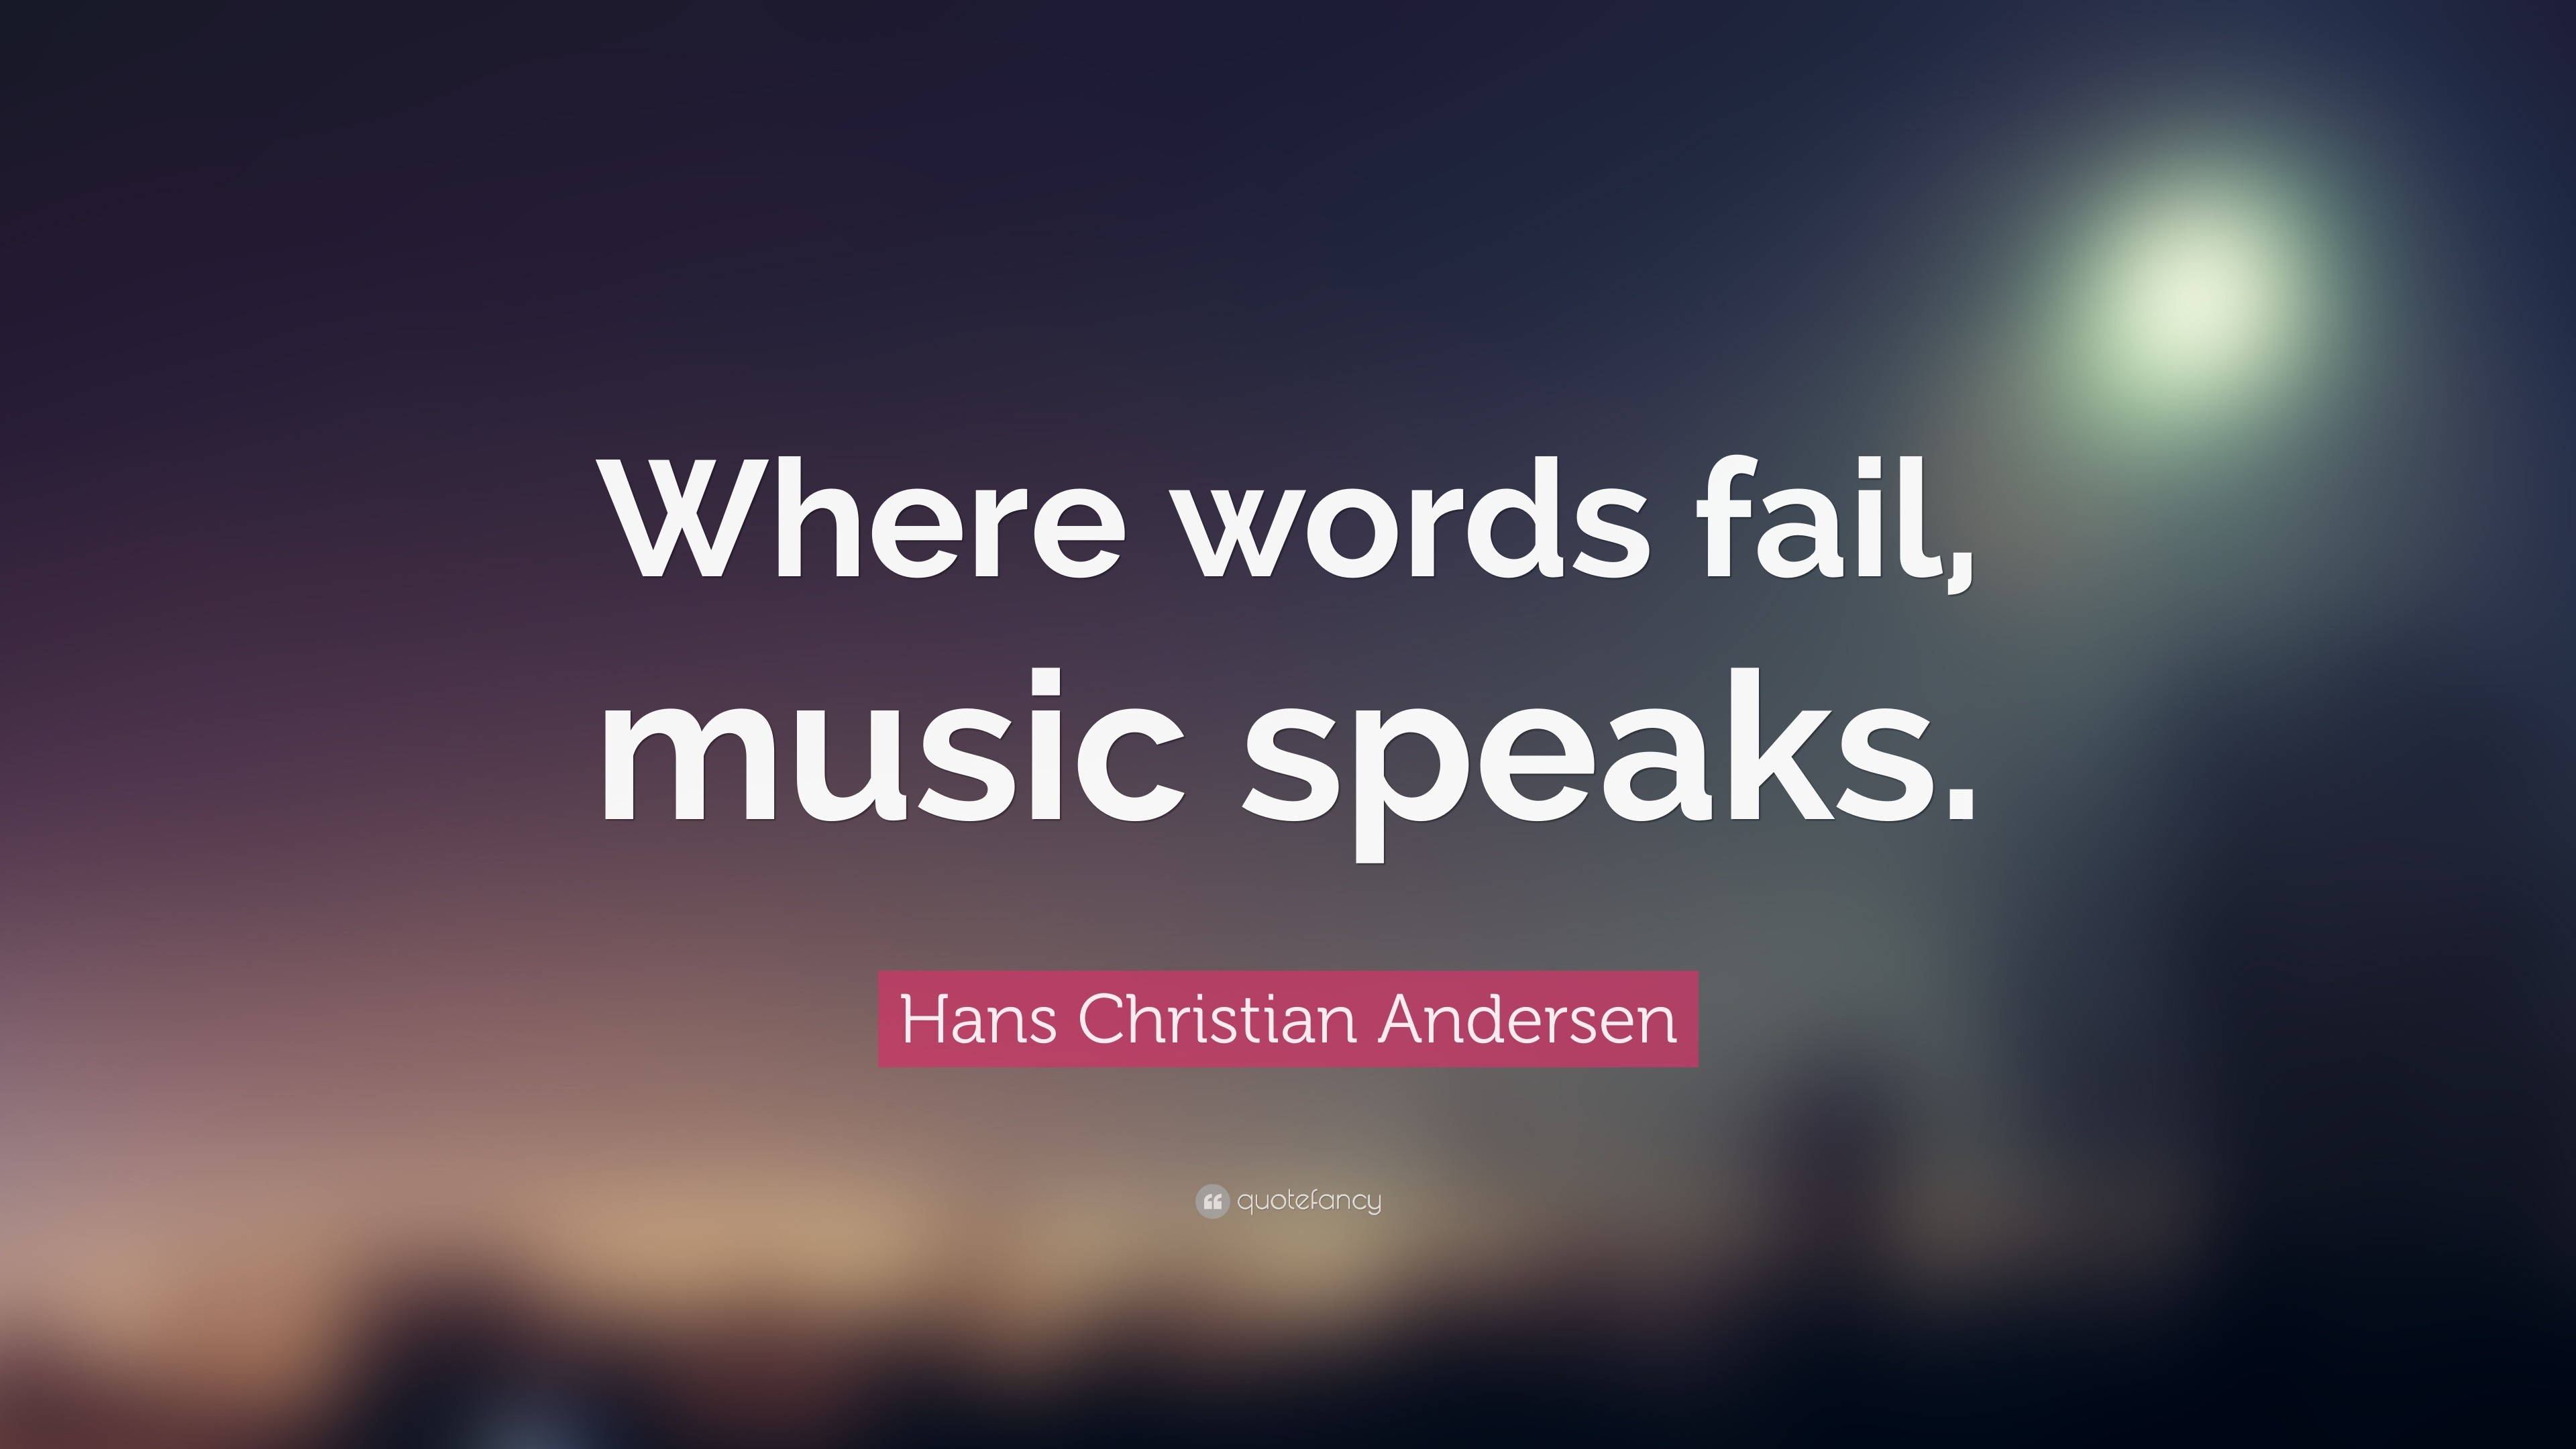 Hans Christian Andersen – 24 inspirational quotes about classical